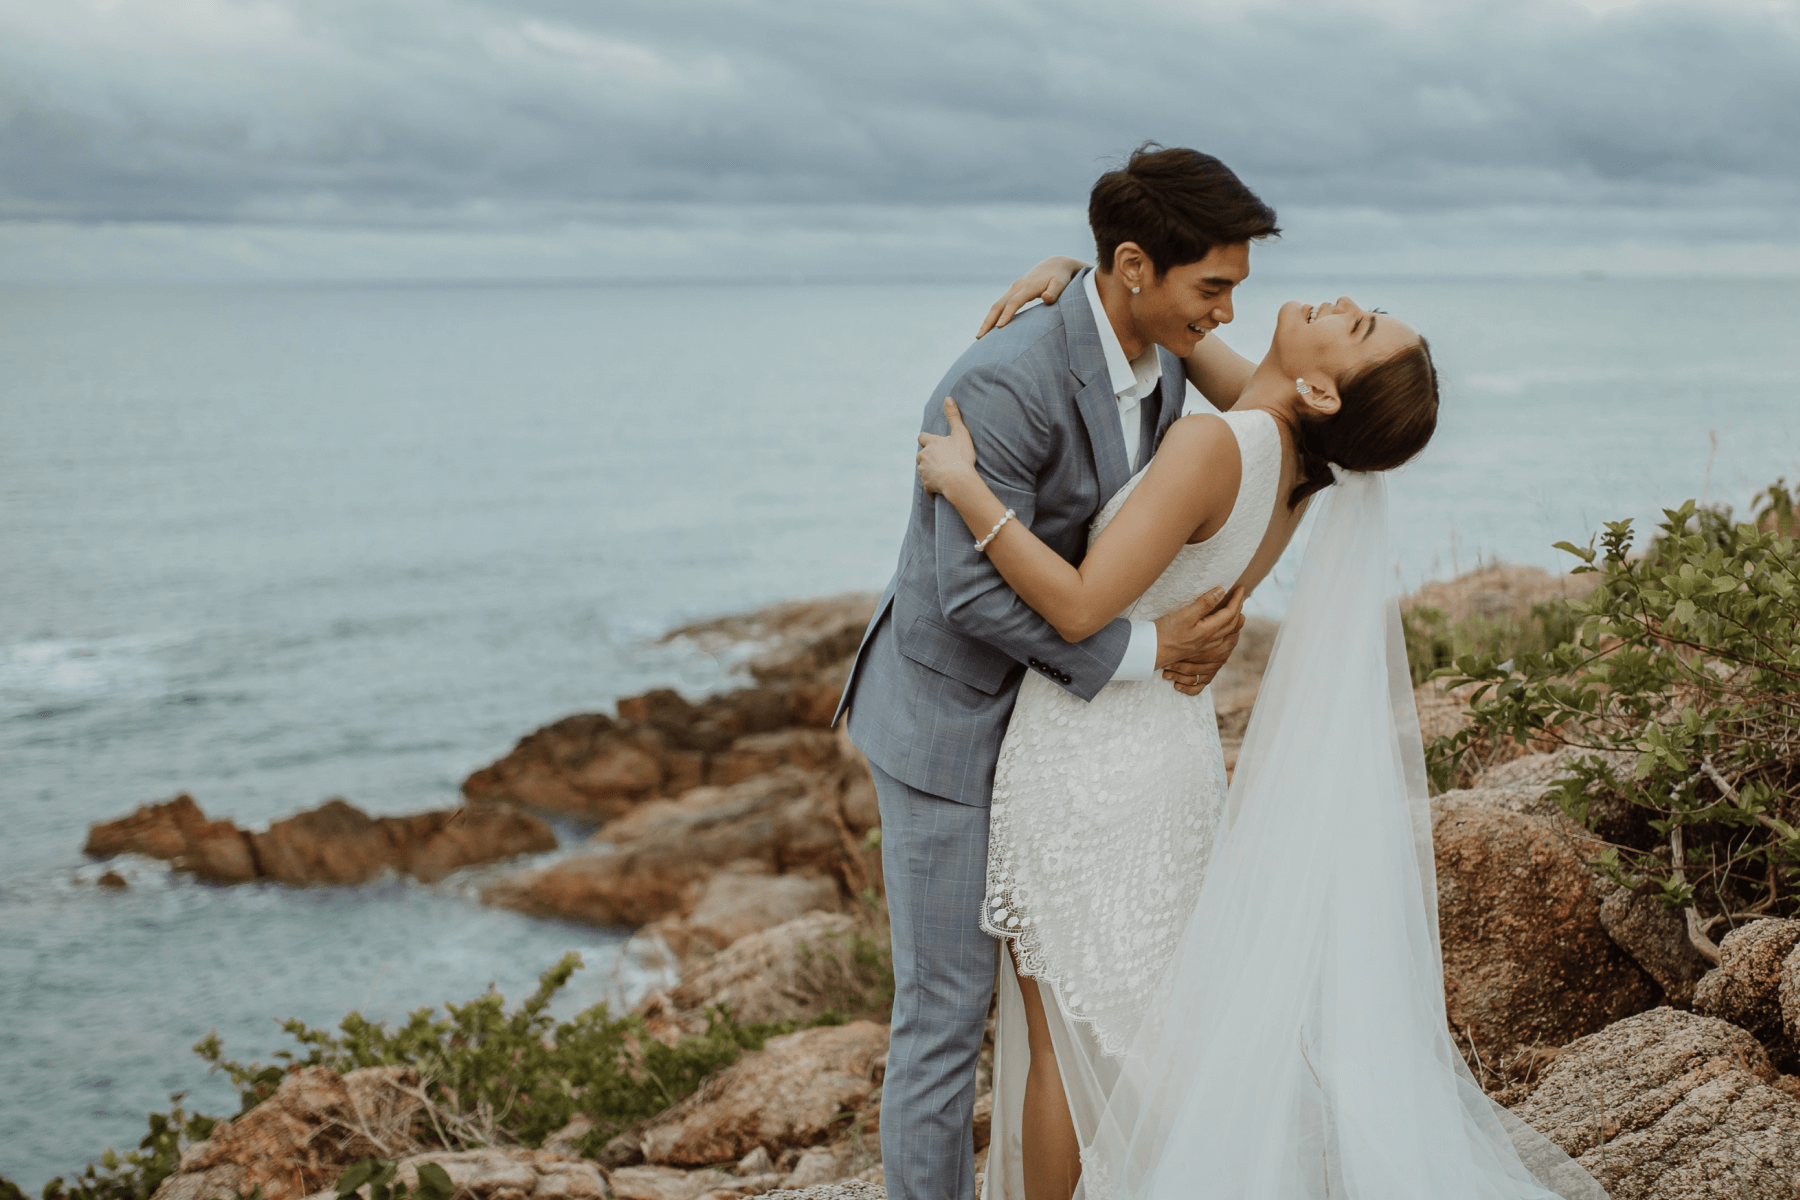 A man in a gray suit embraces a woman in a white wedding gown on a coastline.